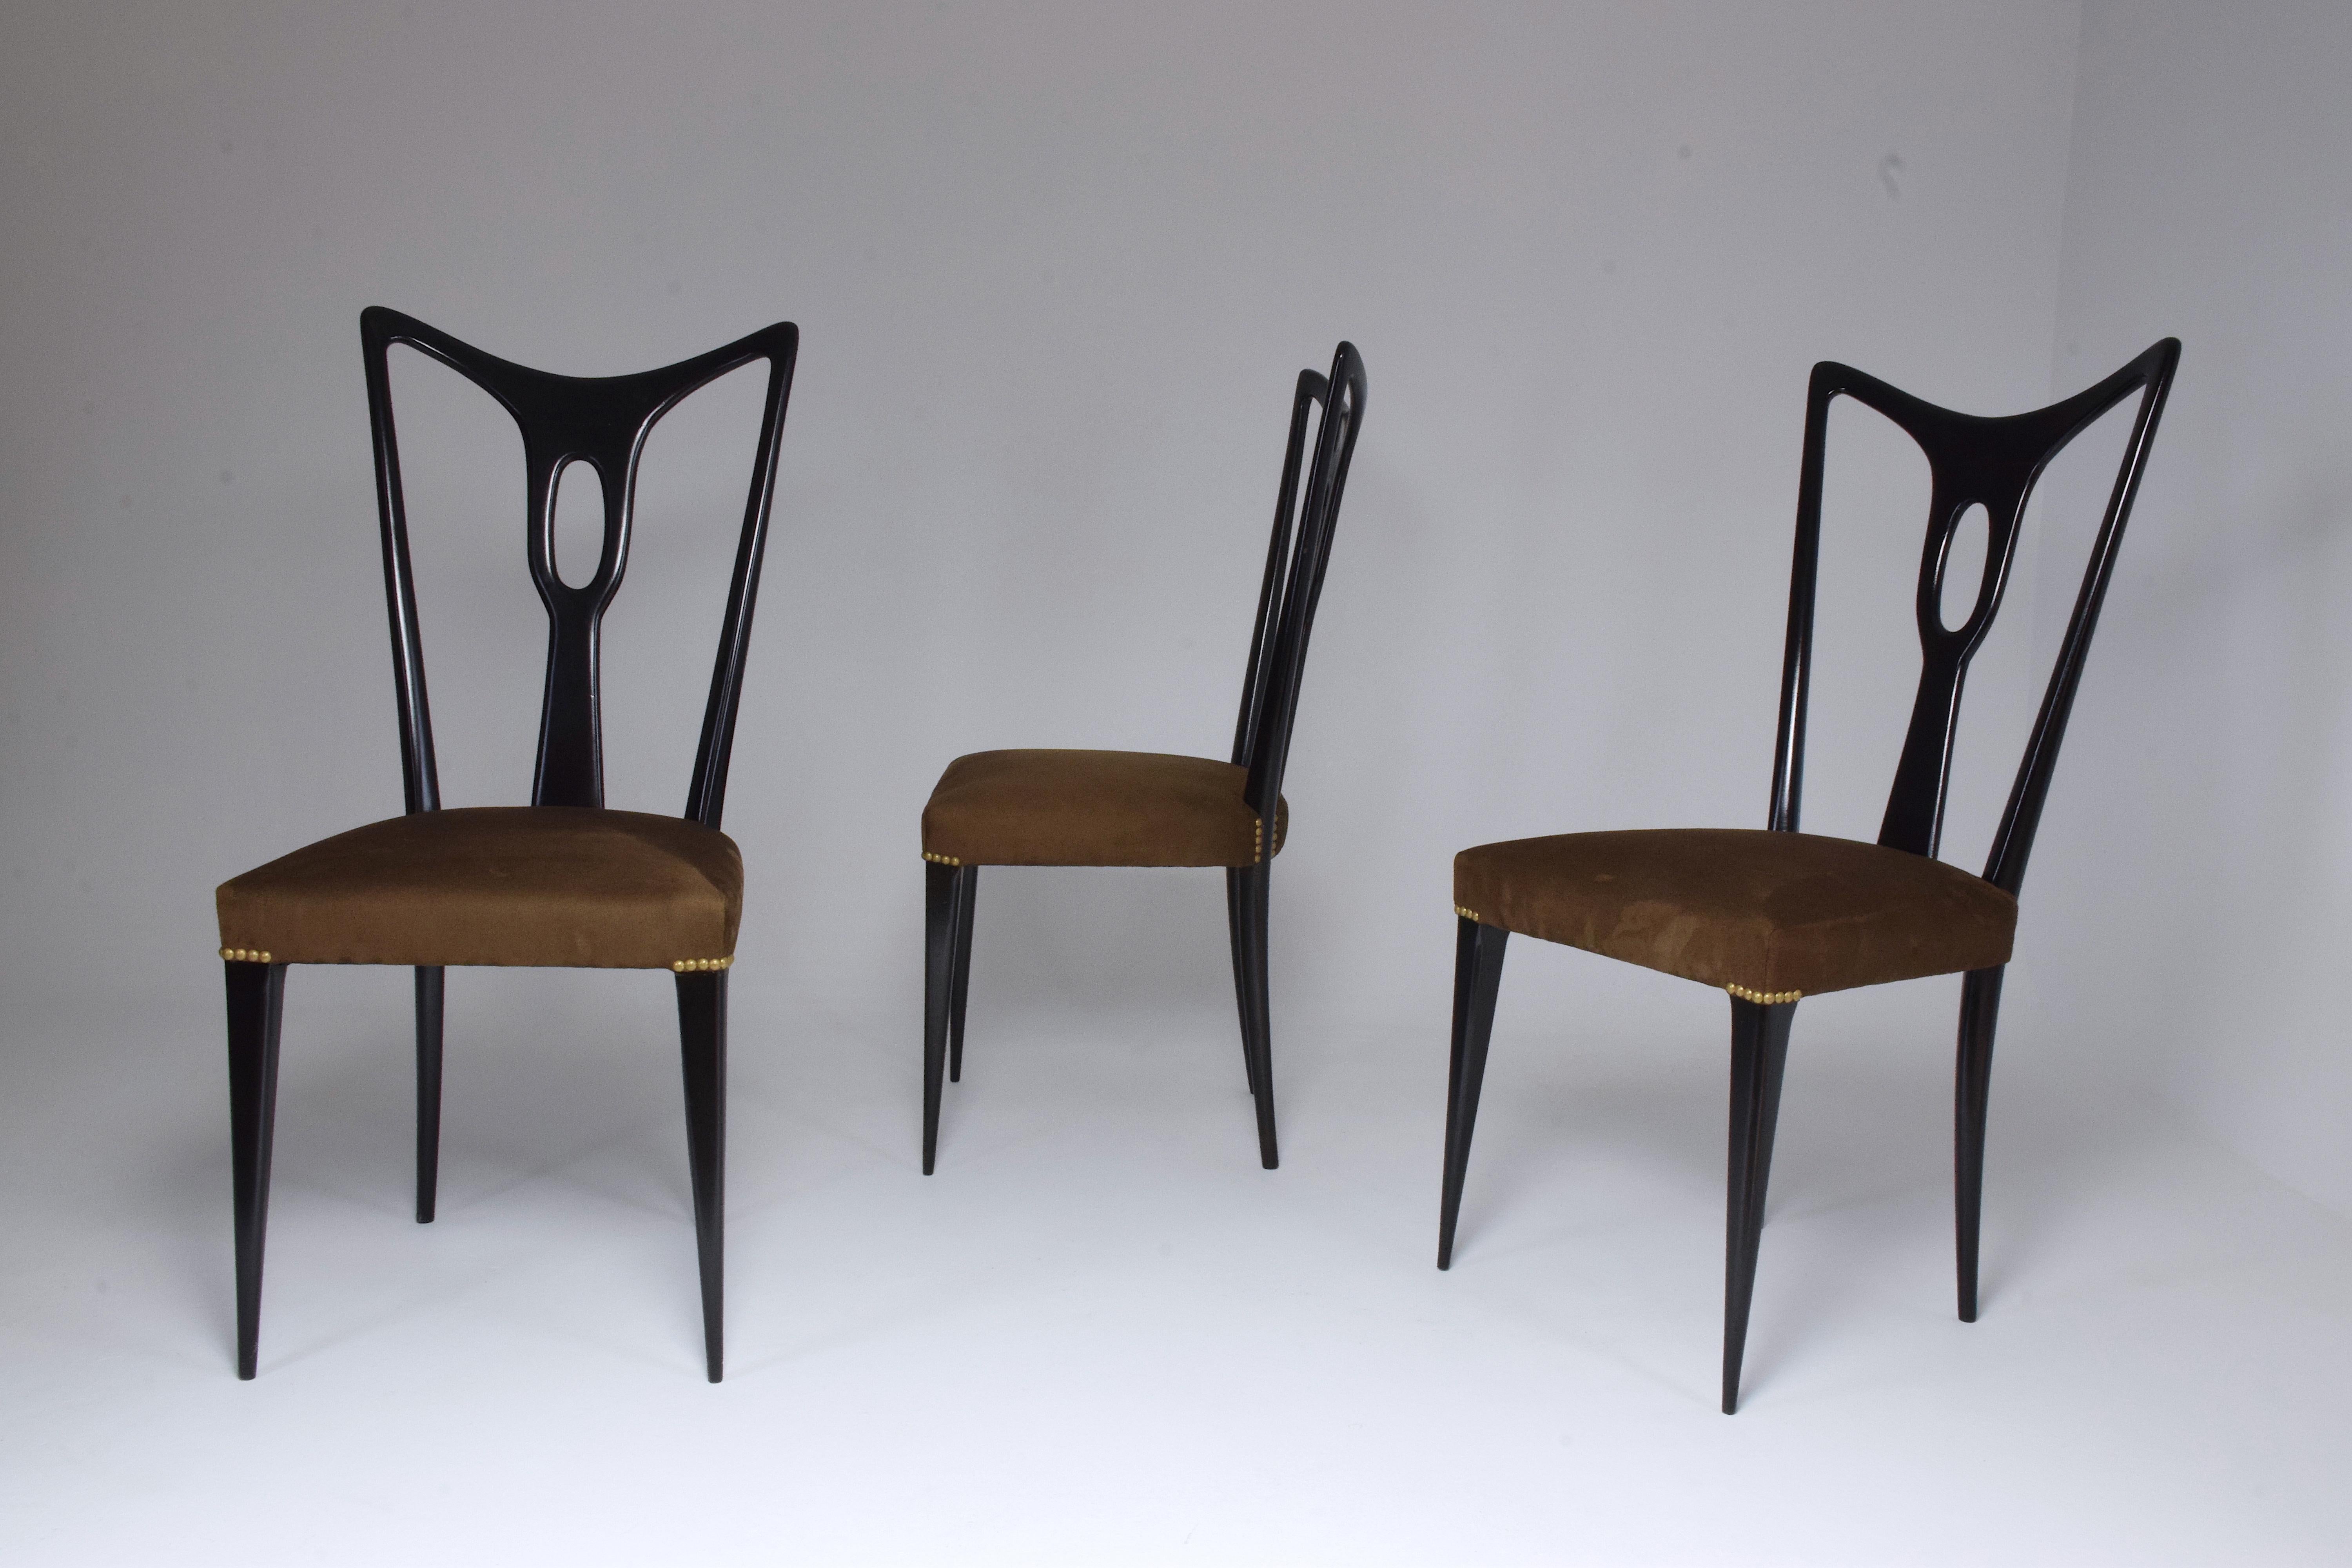 Upholstery Italian Vintage Dining Chairs Attributed to Guglielmo Ulrich, Set of Six, 1940s